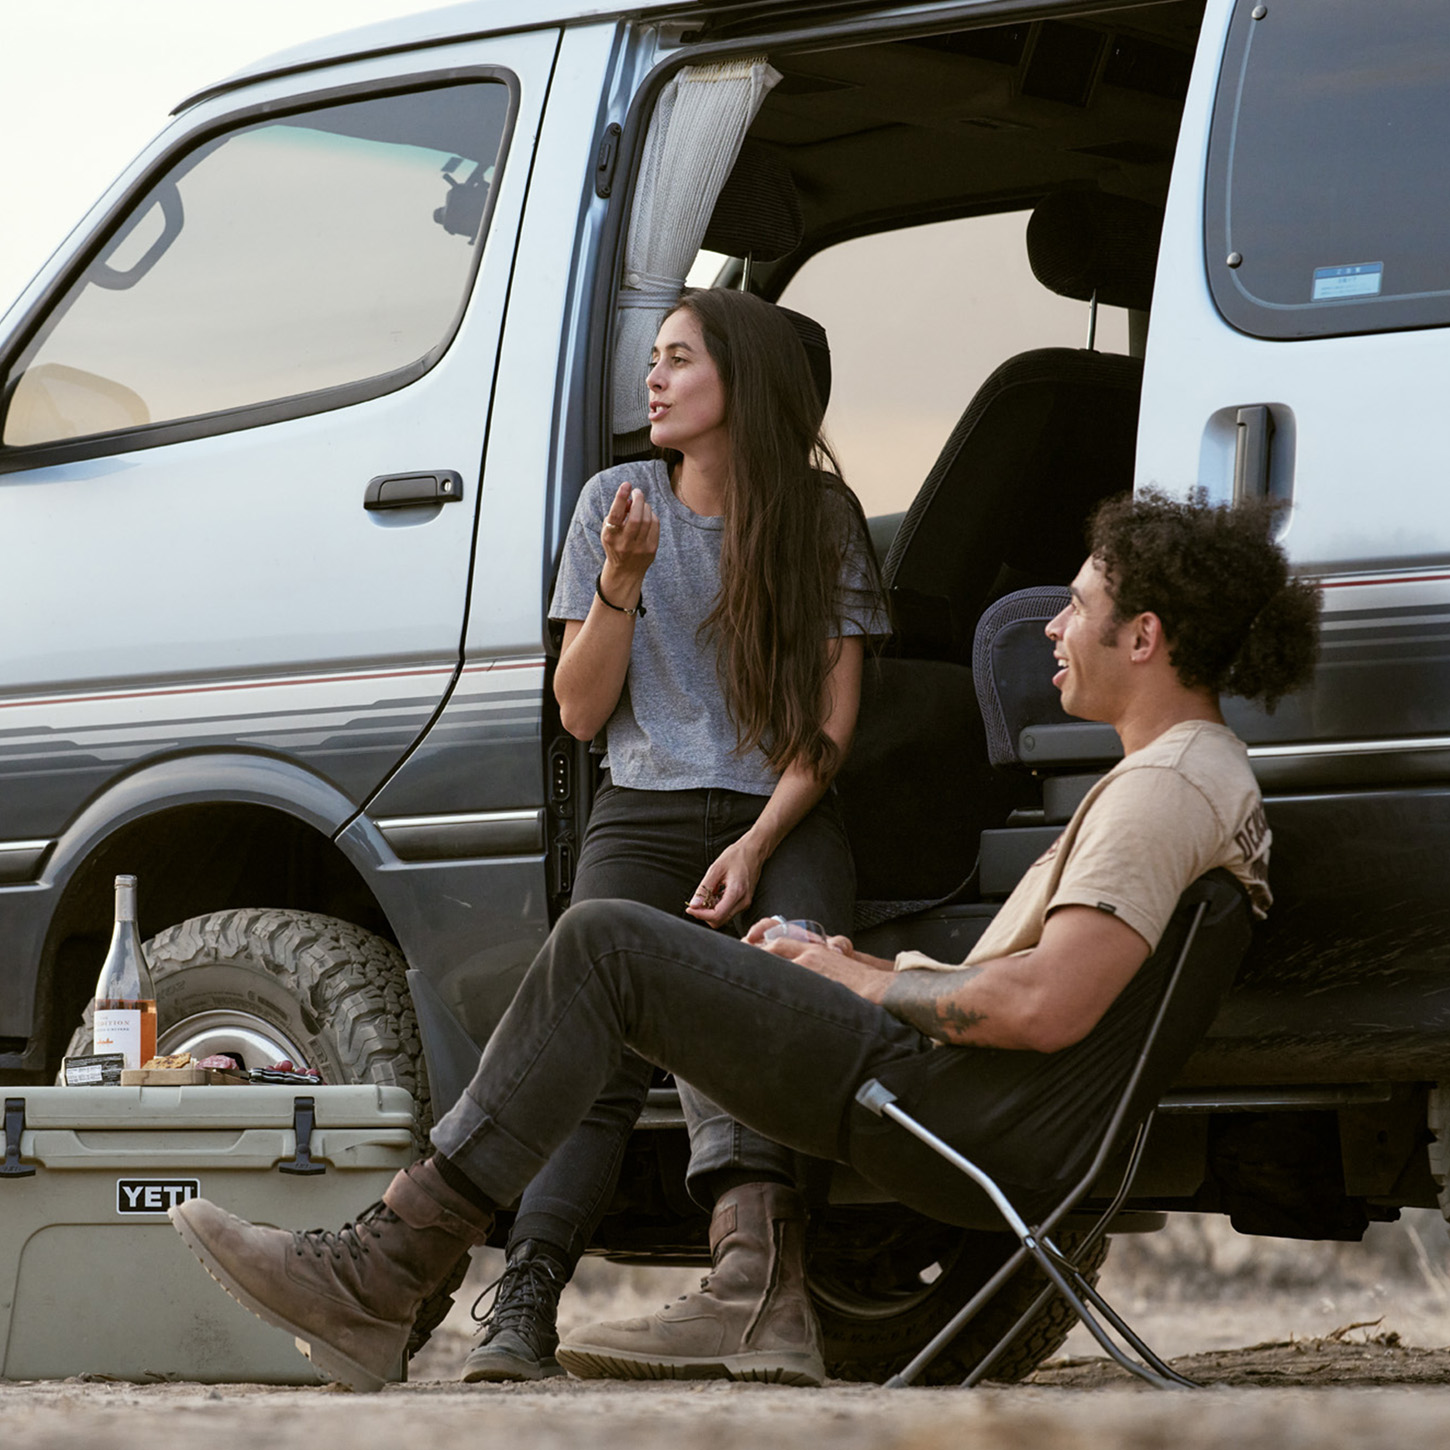 Couple sitting outside van eating a light meal.